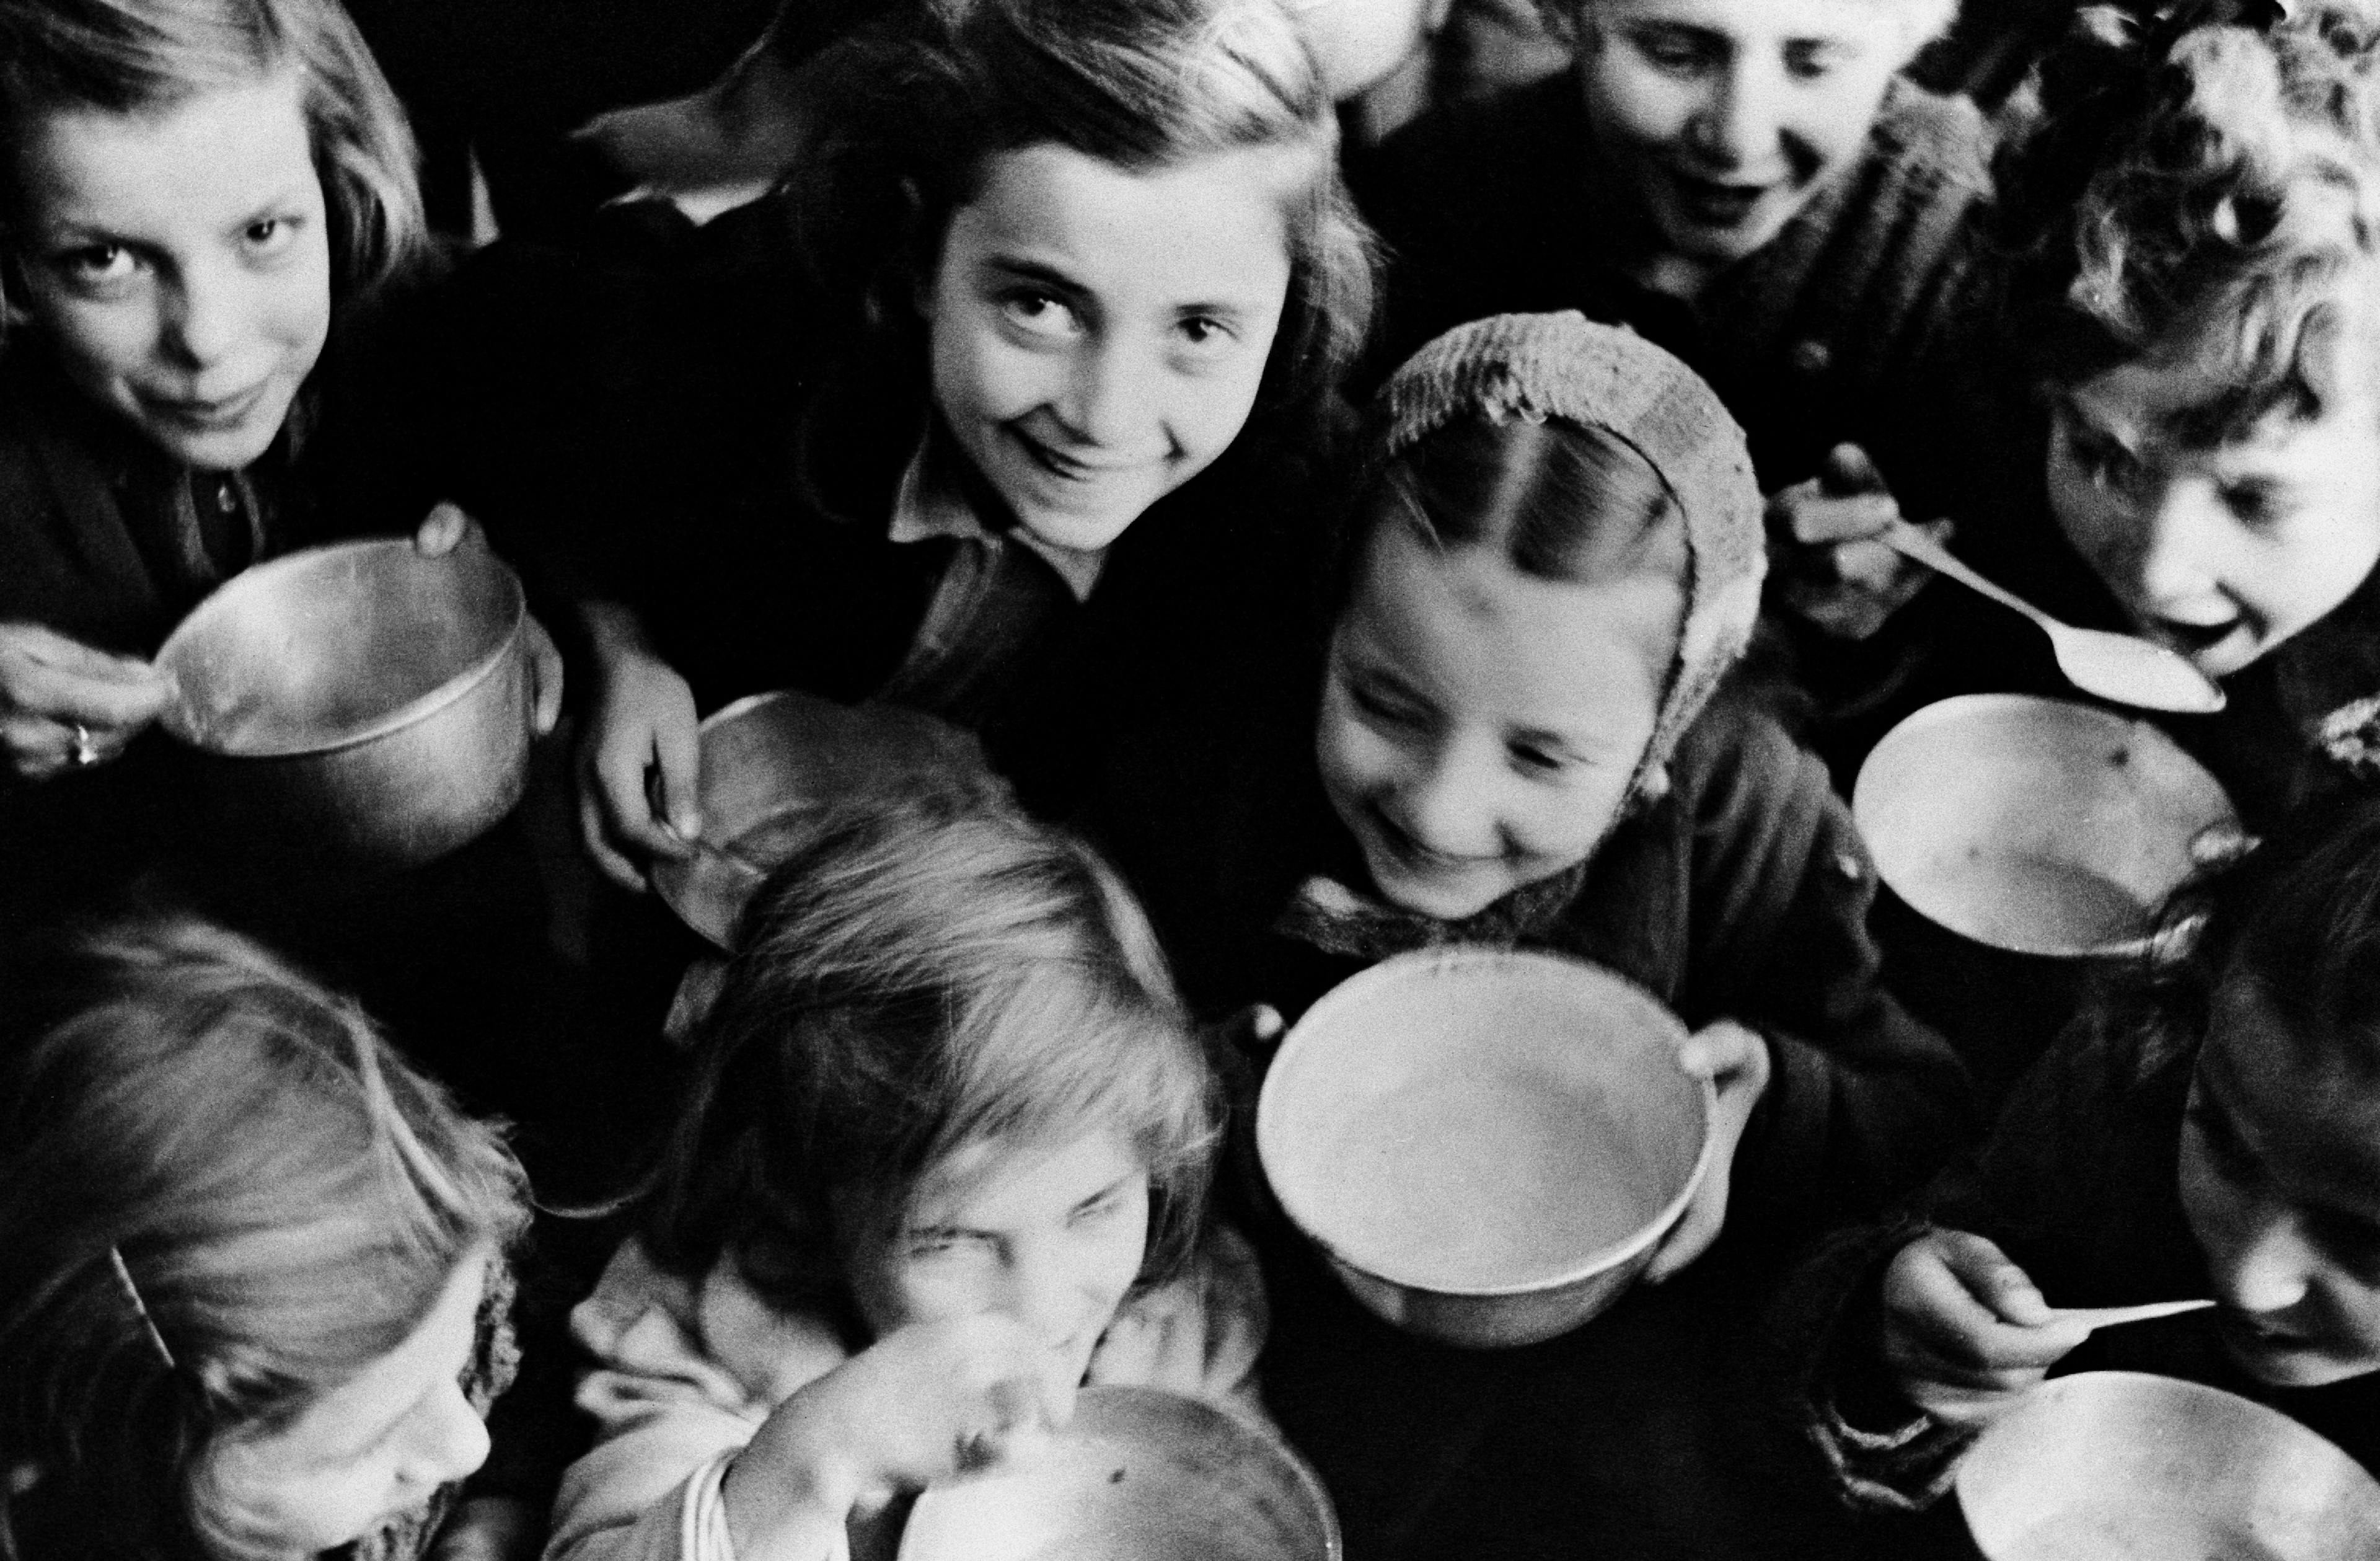 Circa 1946 in Greece, smiling girls of Patras, a north-western port city, eat their first UNRRA-provided meal from metal bowls.